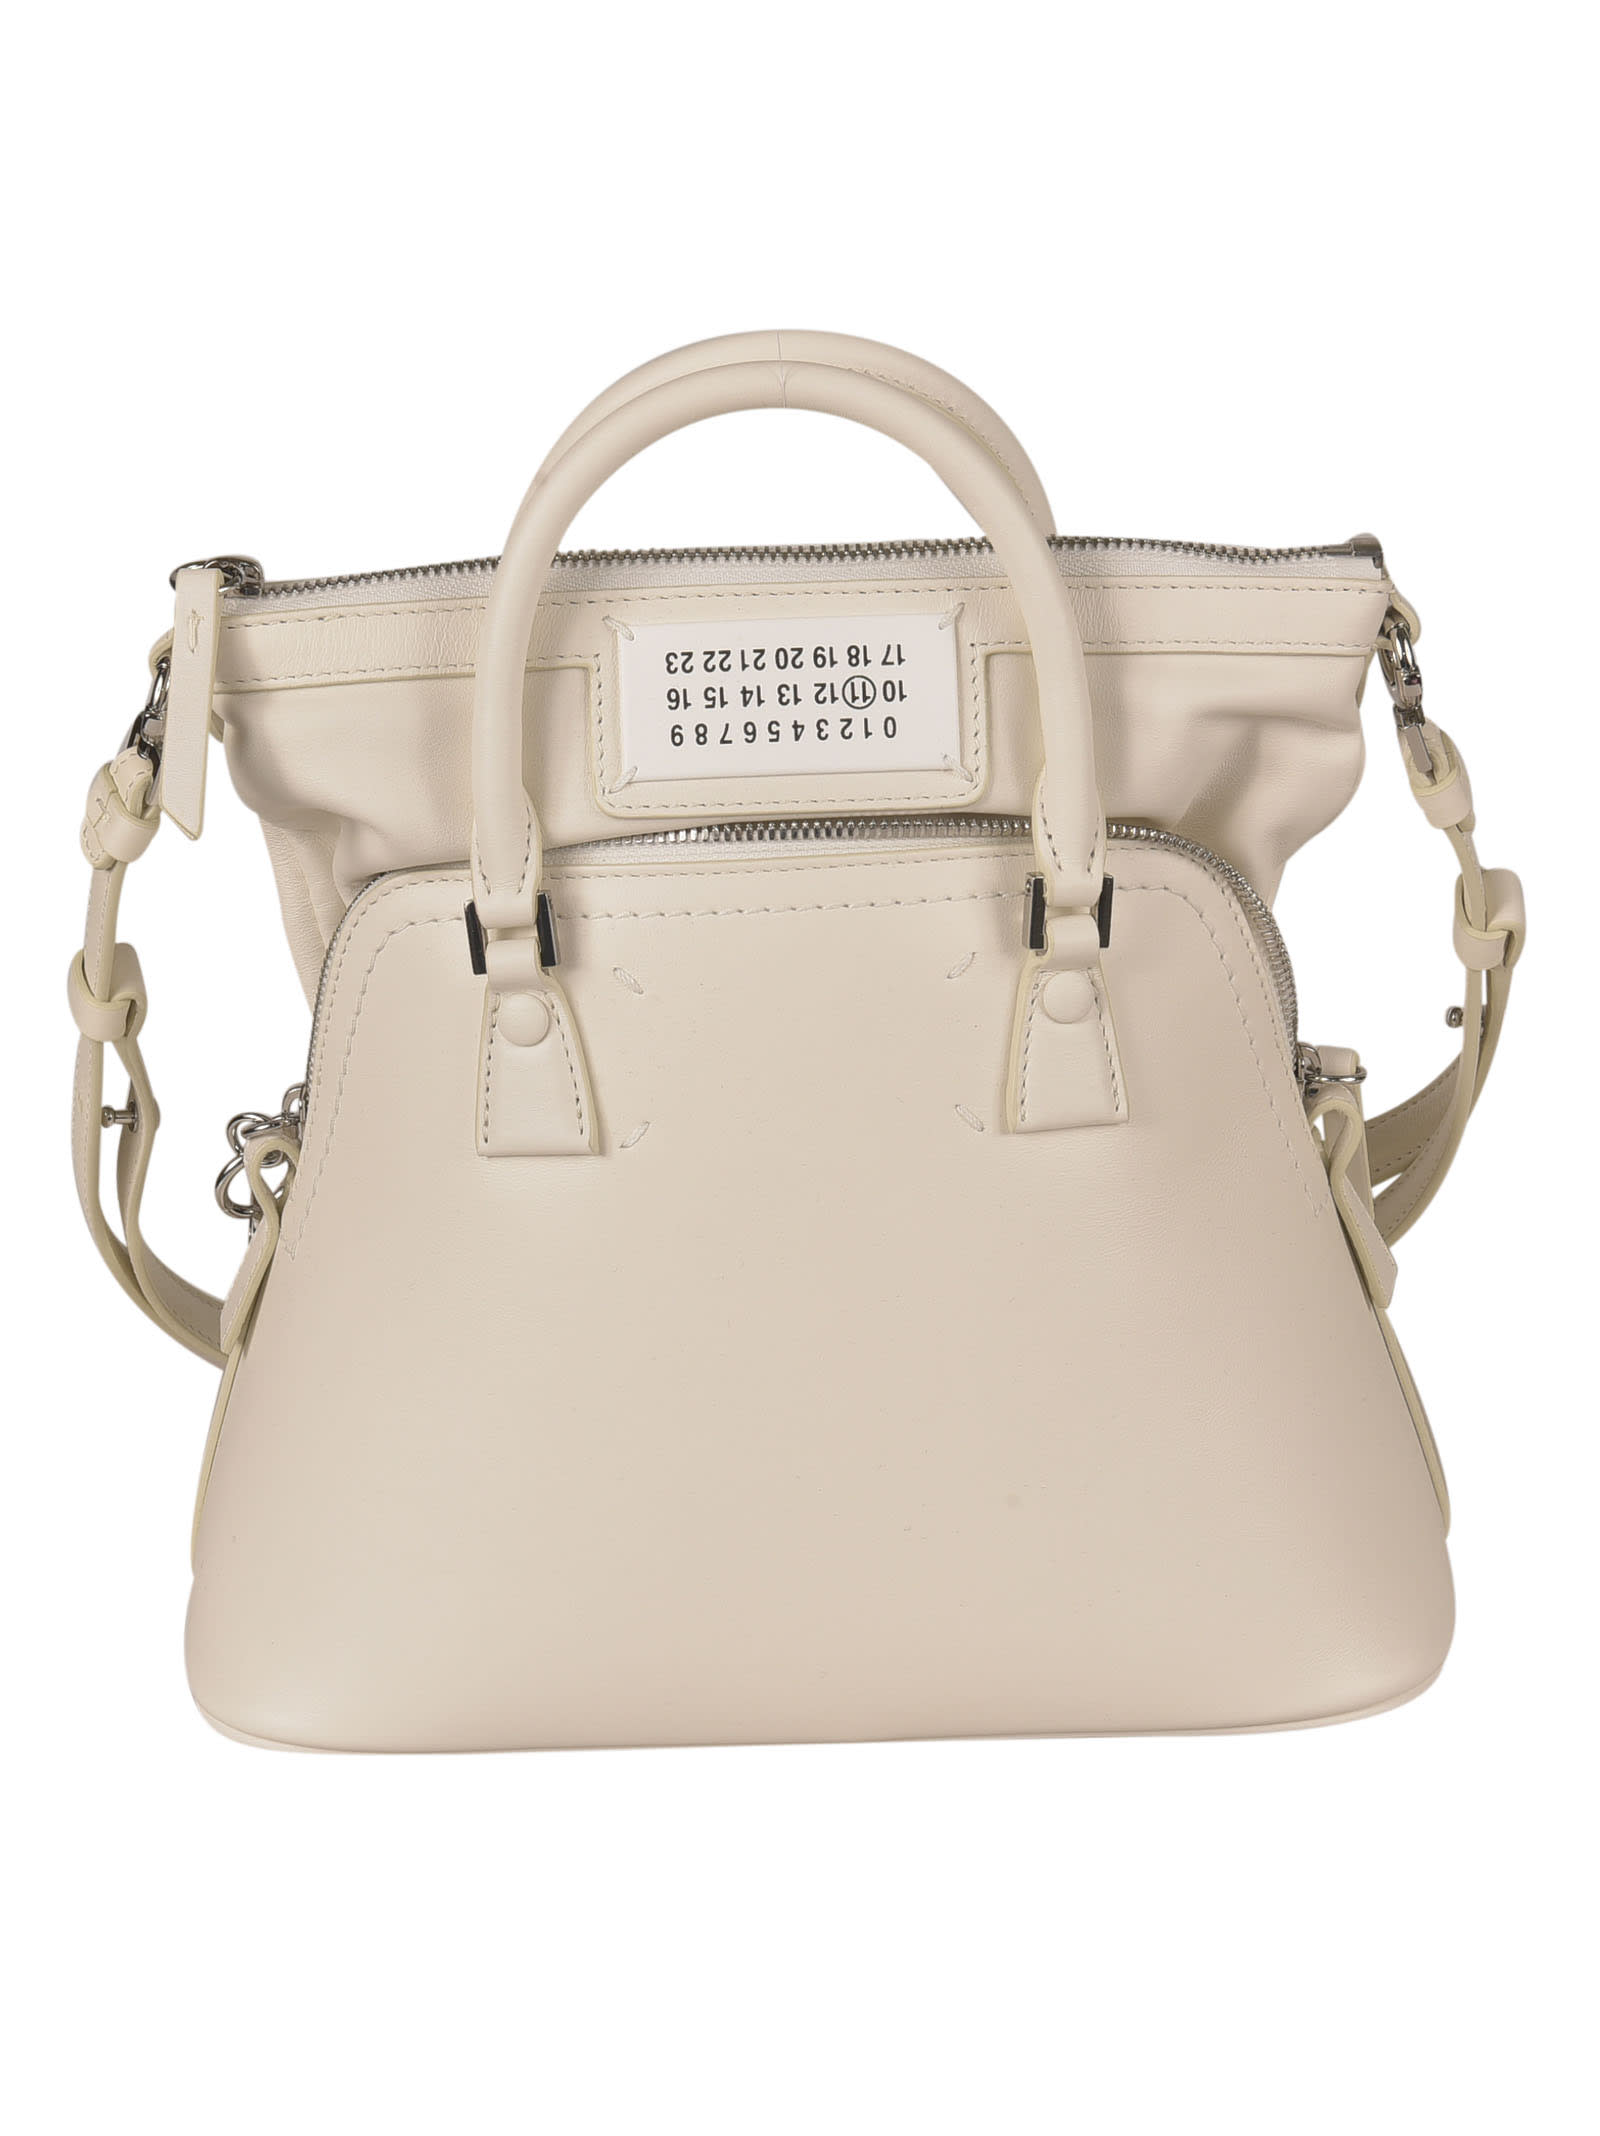 MAISON MARGIELA TOP ZIP SMOOTH TOTE,S56WG0082 P4303 T1003